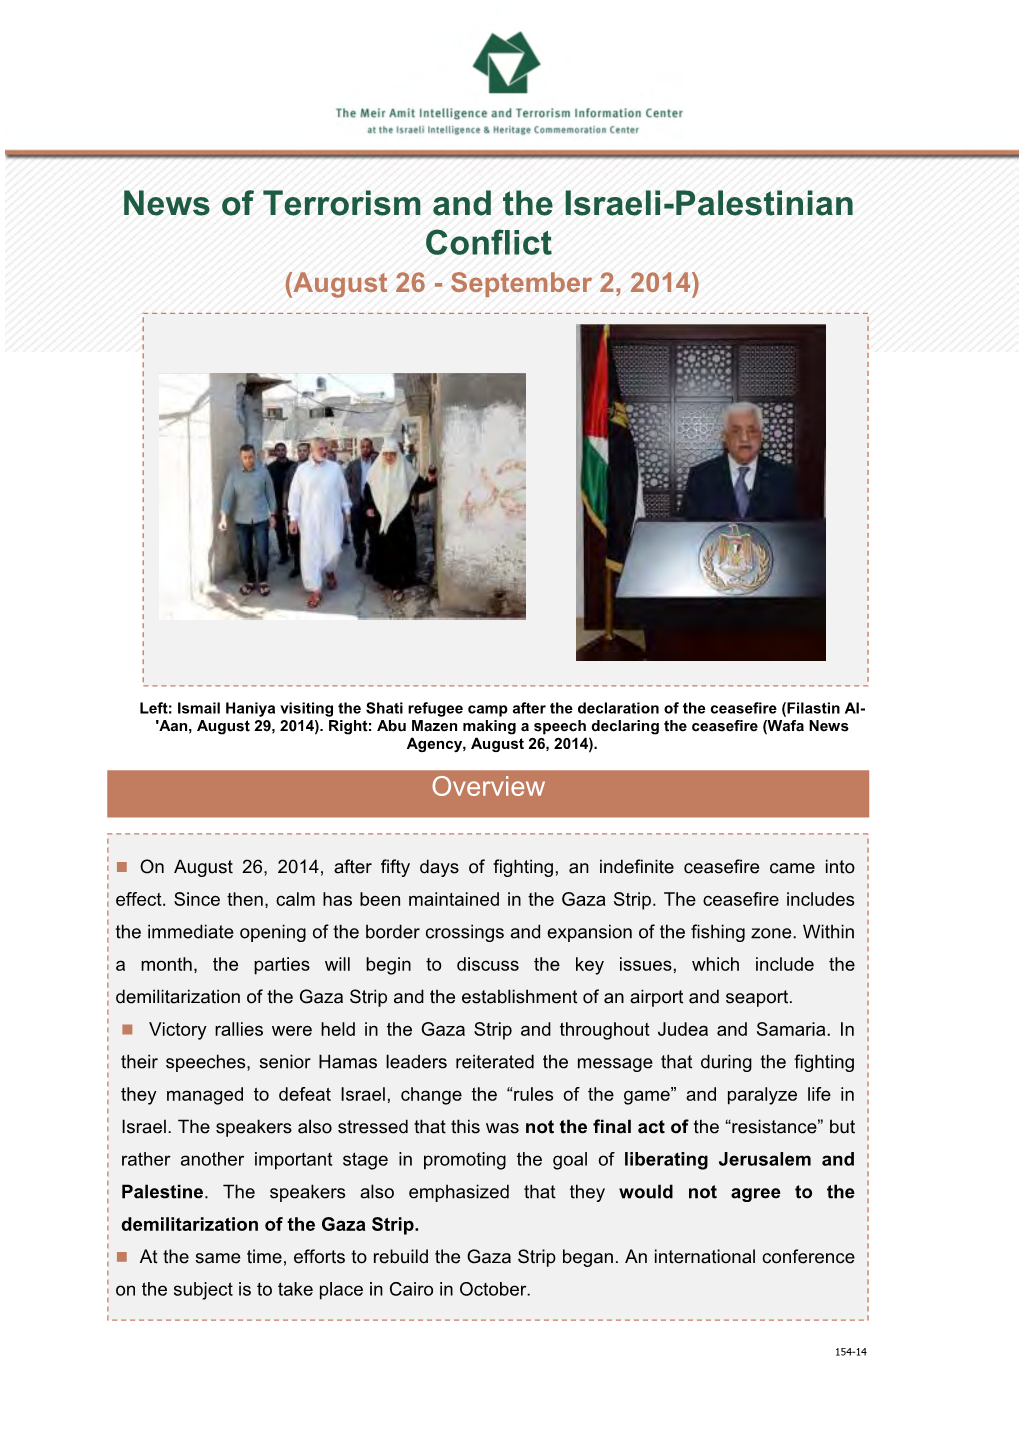 News of Terrorism and the Israeli-Palestinian Conflict (August 26 - September 2, 2014)